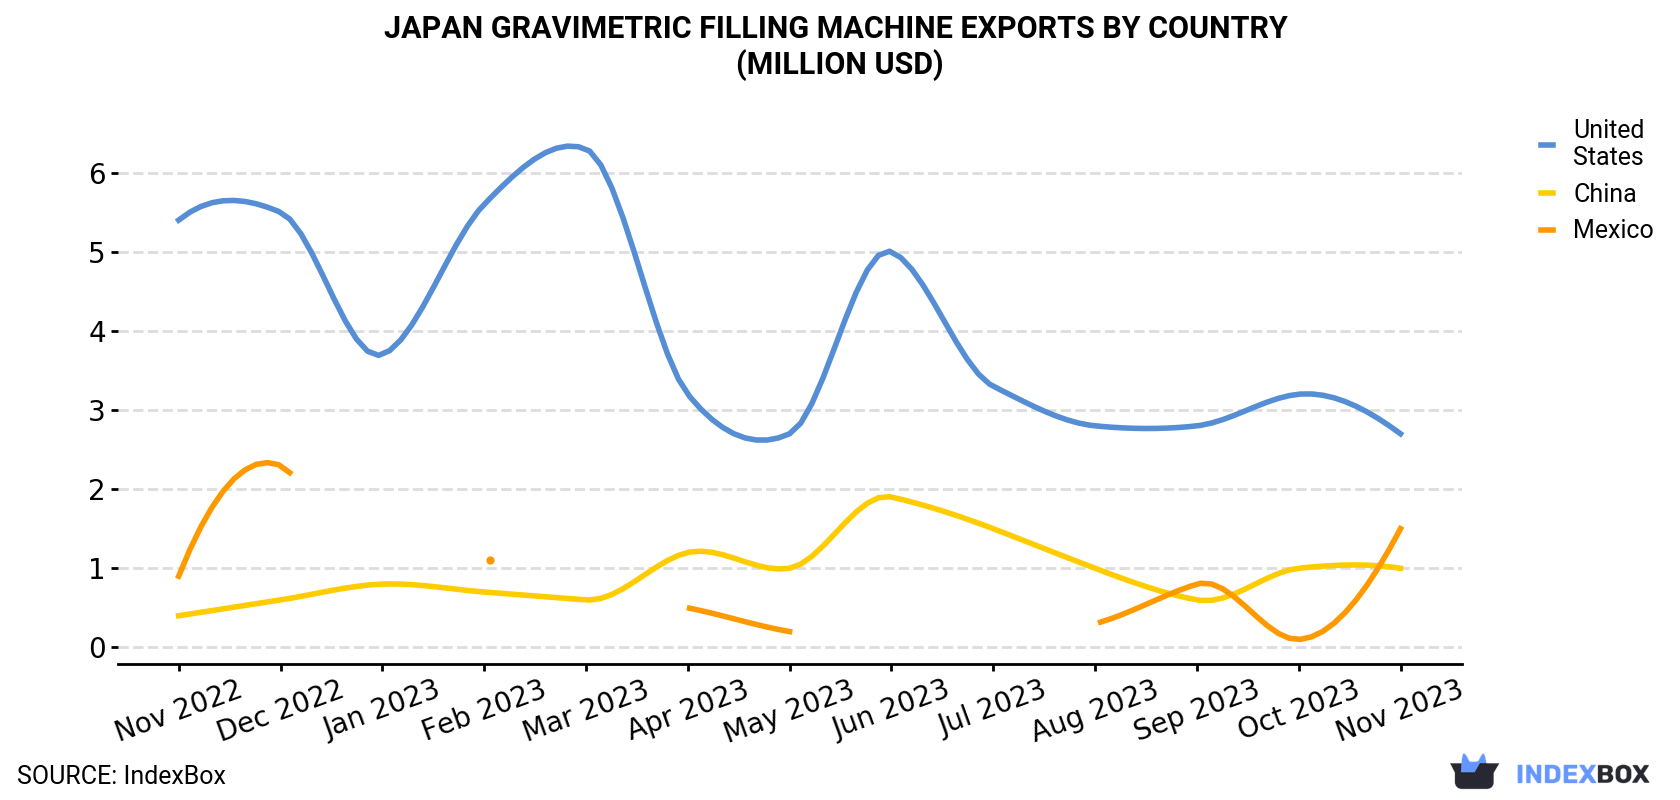 Japan Gravimetric Filling Machine Exports By Country (Million USD)